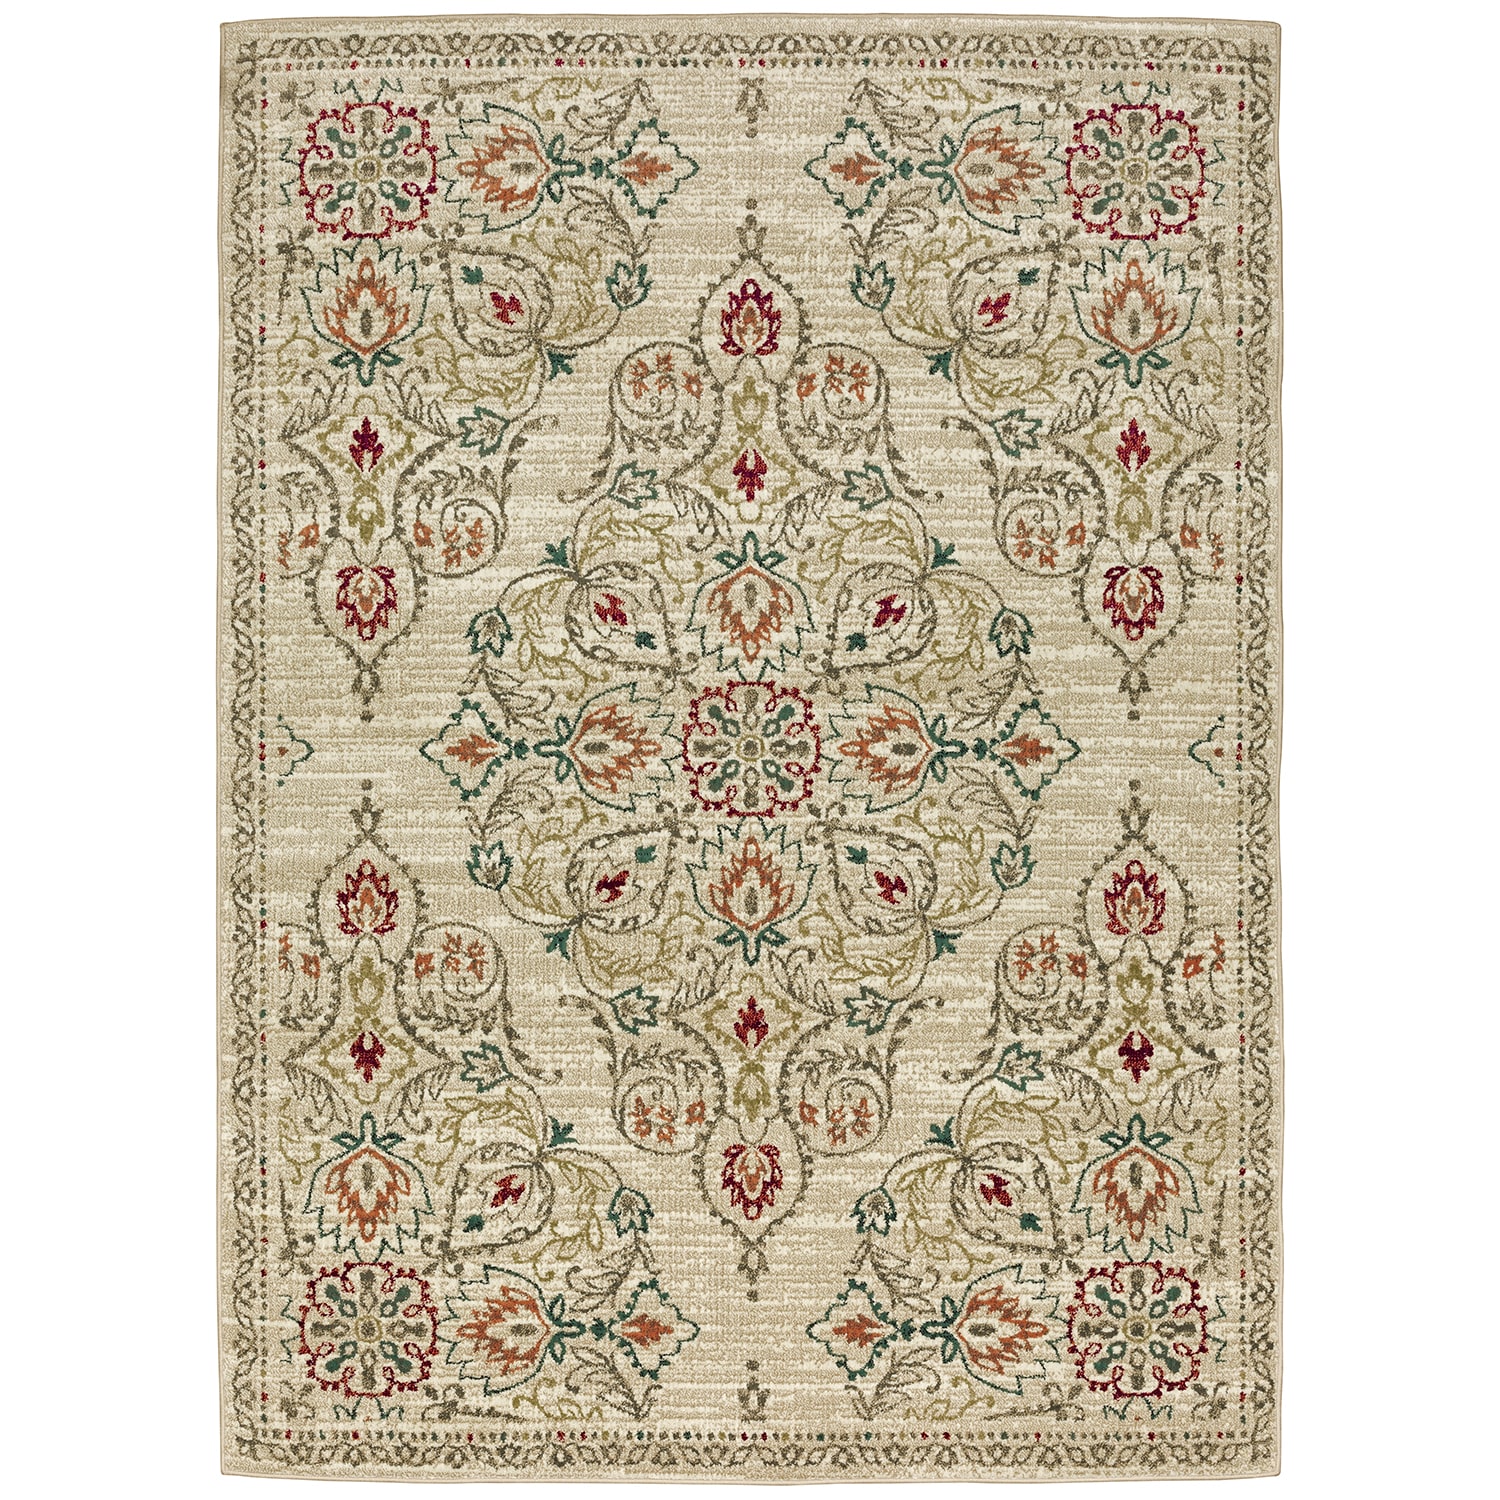 8 X 11 Rugs At Com, Rugs Of The World Tampa Bay Reviews